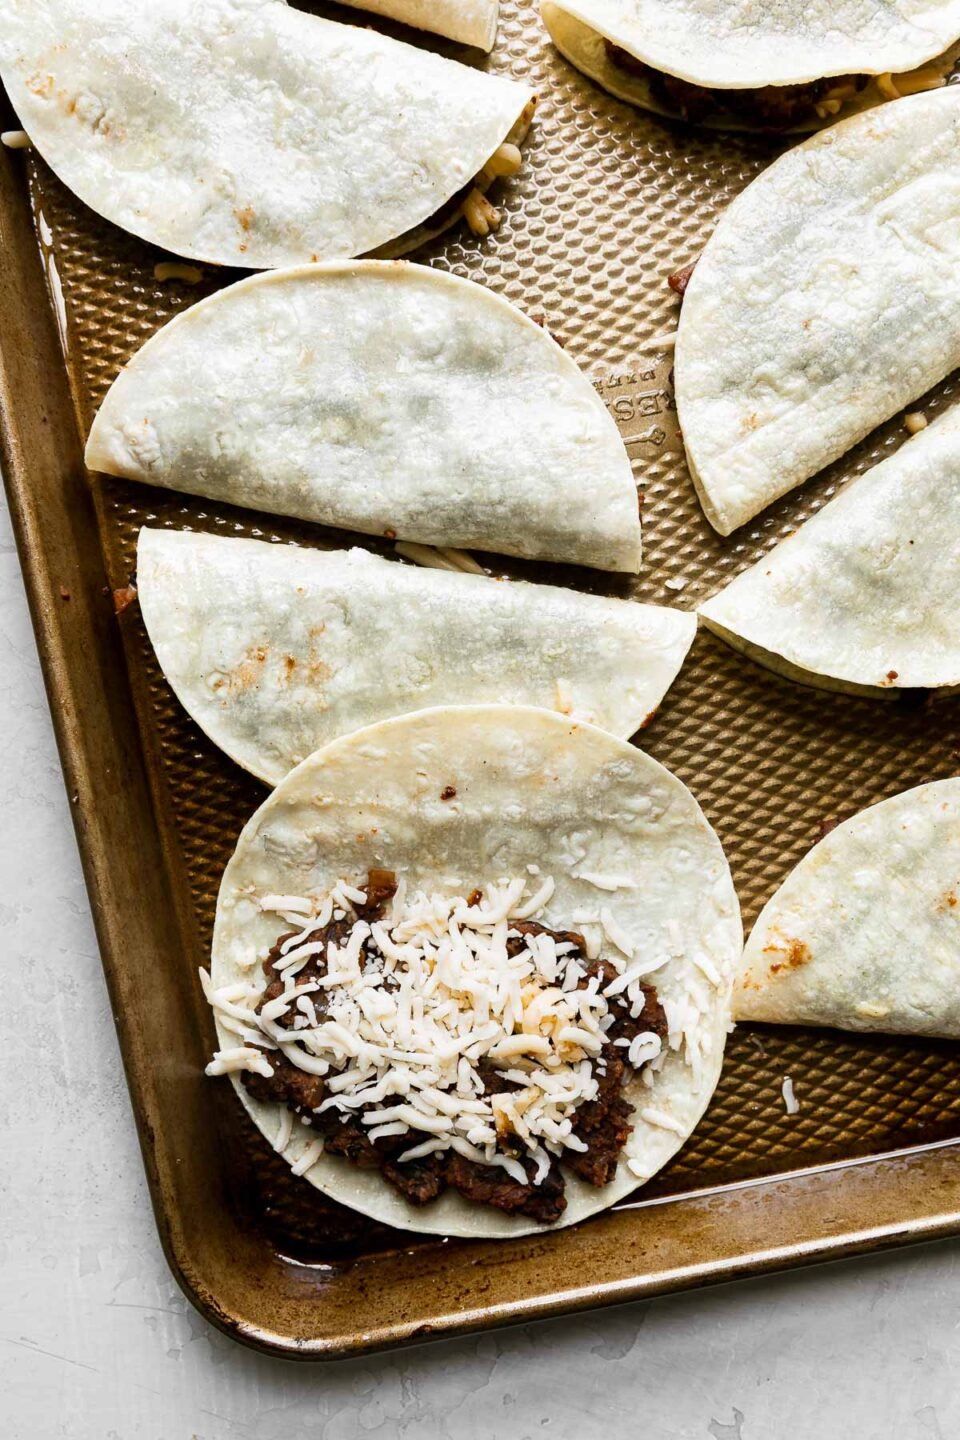 10 assembled black bean tacos arranged on a baking sheet. 9 of the tacos have been assembled with the tortillas folded, while one remains unfolded revealing the black bean mixture spread on one side of the tortillas with Pepper Jack cheese sprinkled over top. The baking sheet rests atop a creamy white textured surface.